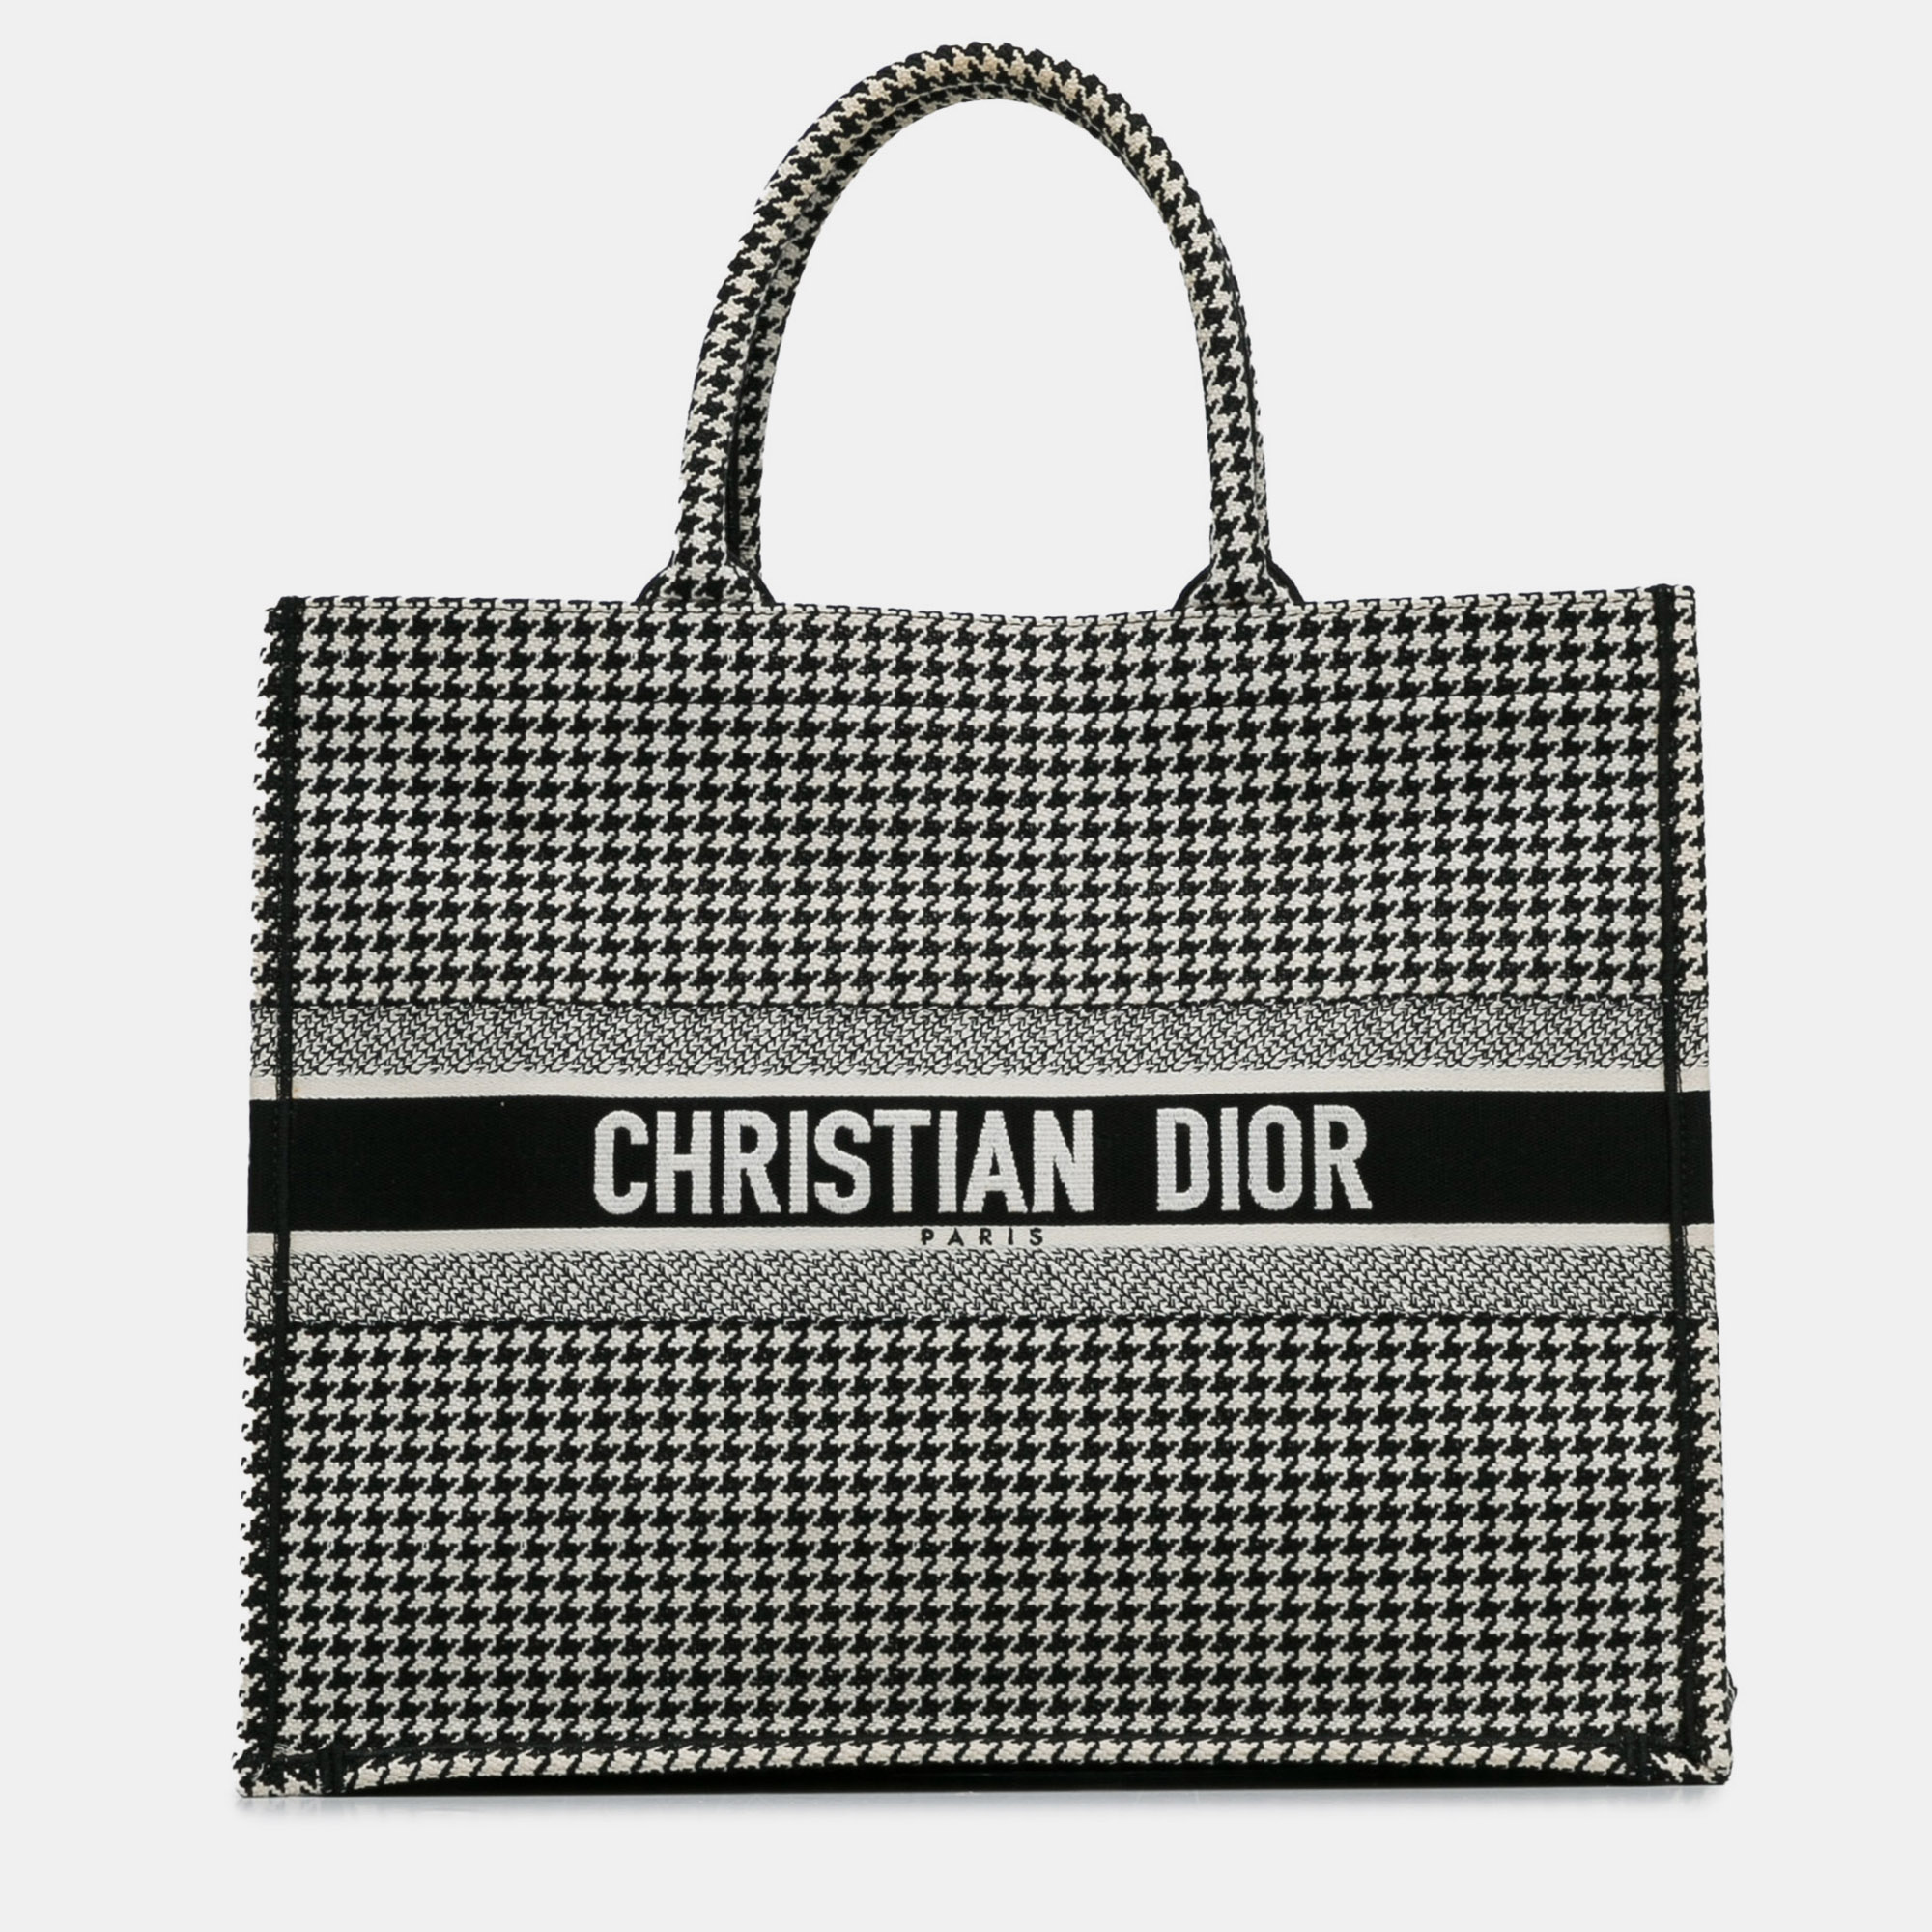 Dior large houndstooth embroidered book tote